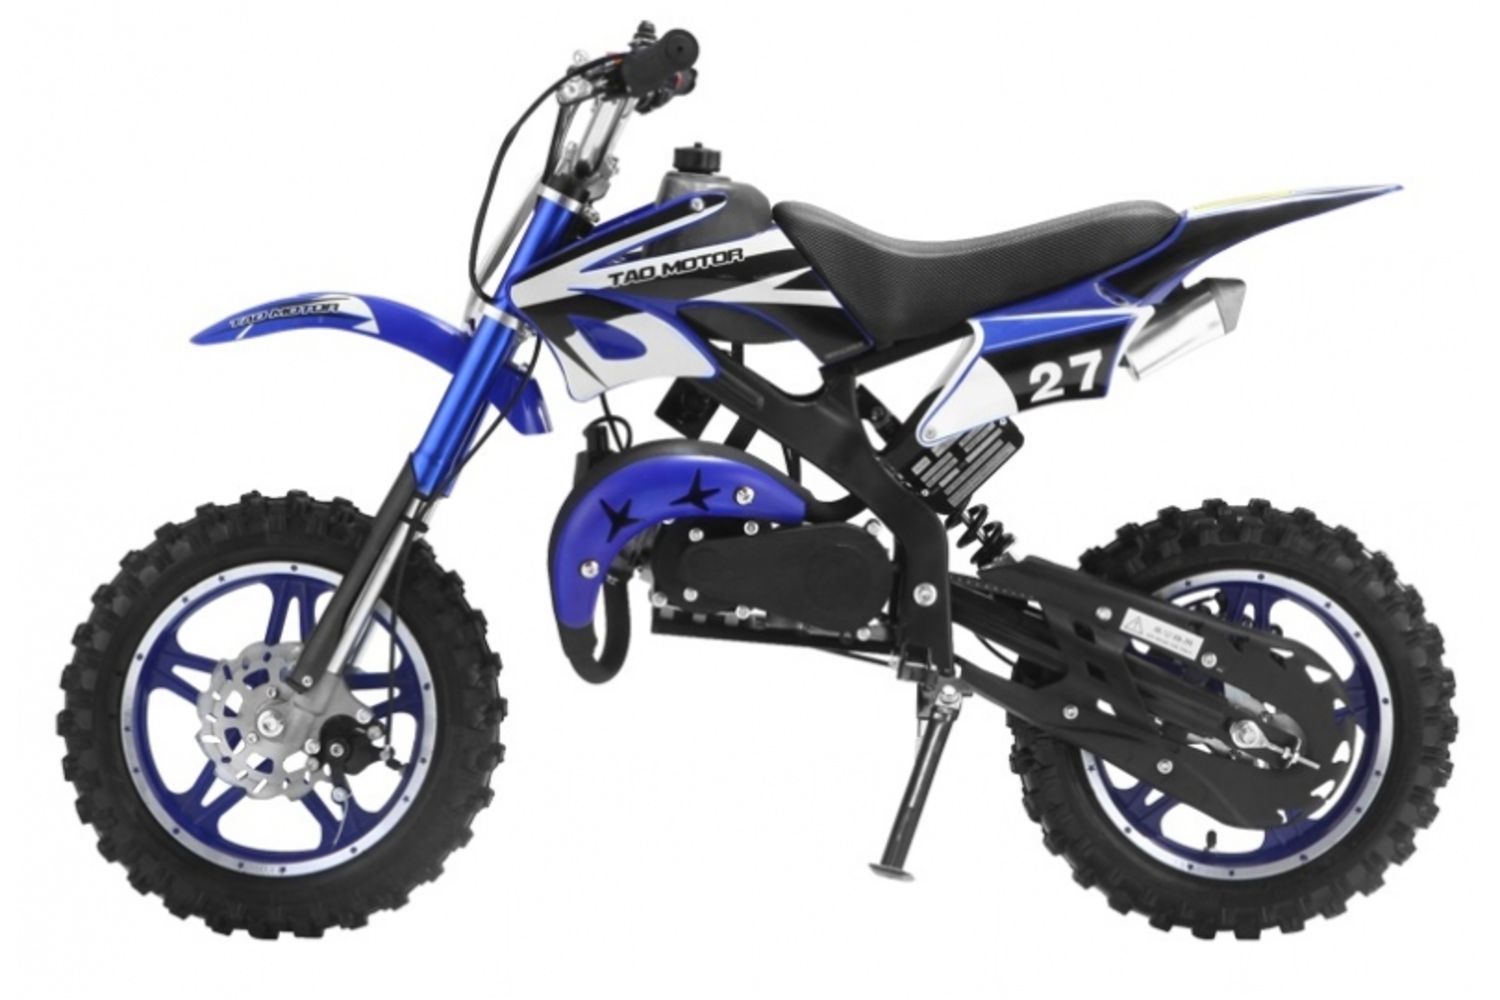 Brand New Quad Bikes + Dirt Bikes: Quads in Two Engine Sizes, Plus Mini Dirt Bikes, Over 100 Lots Available